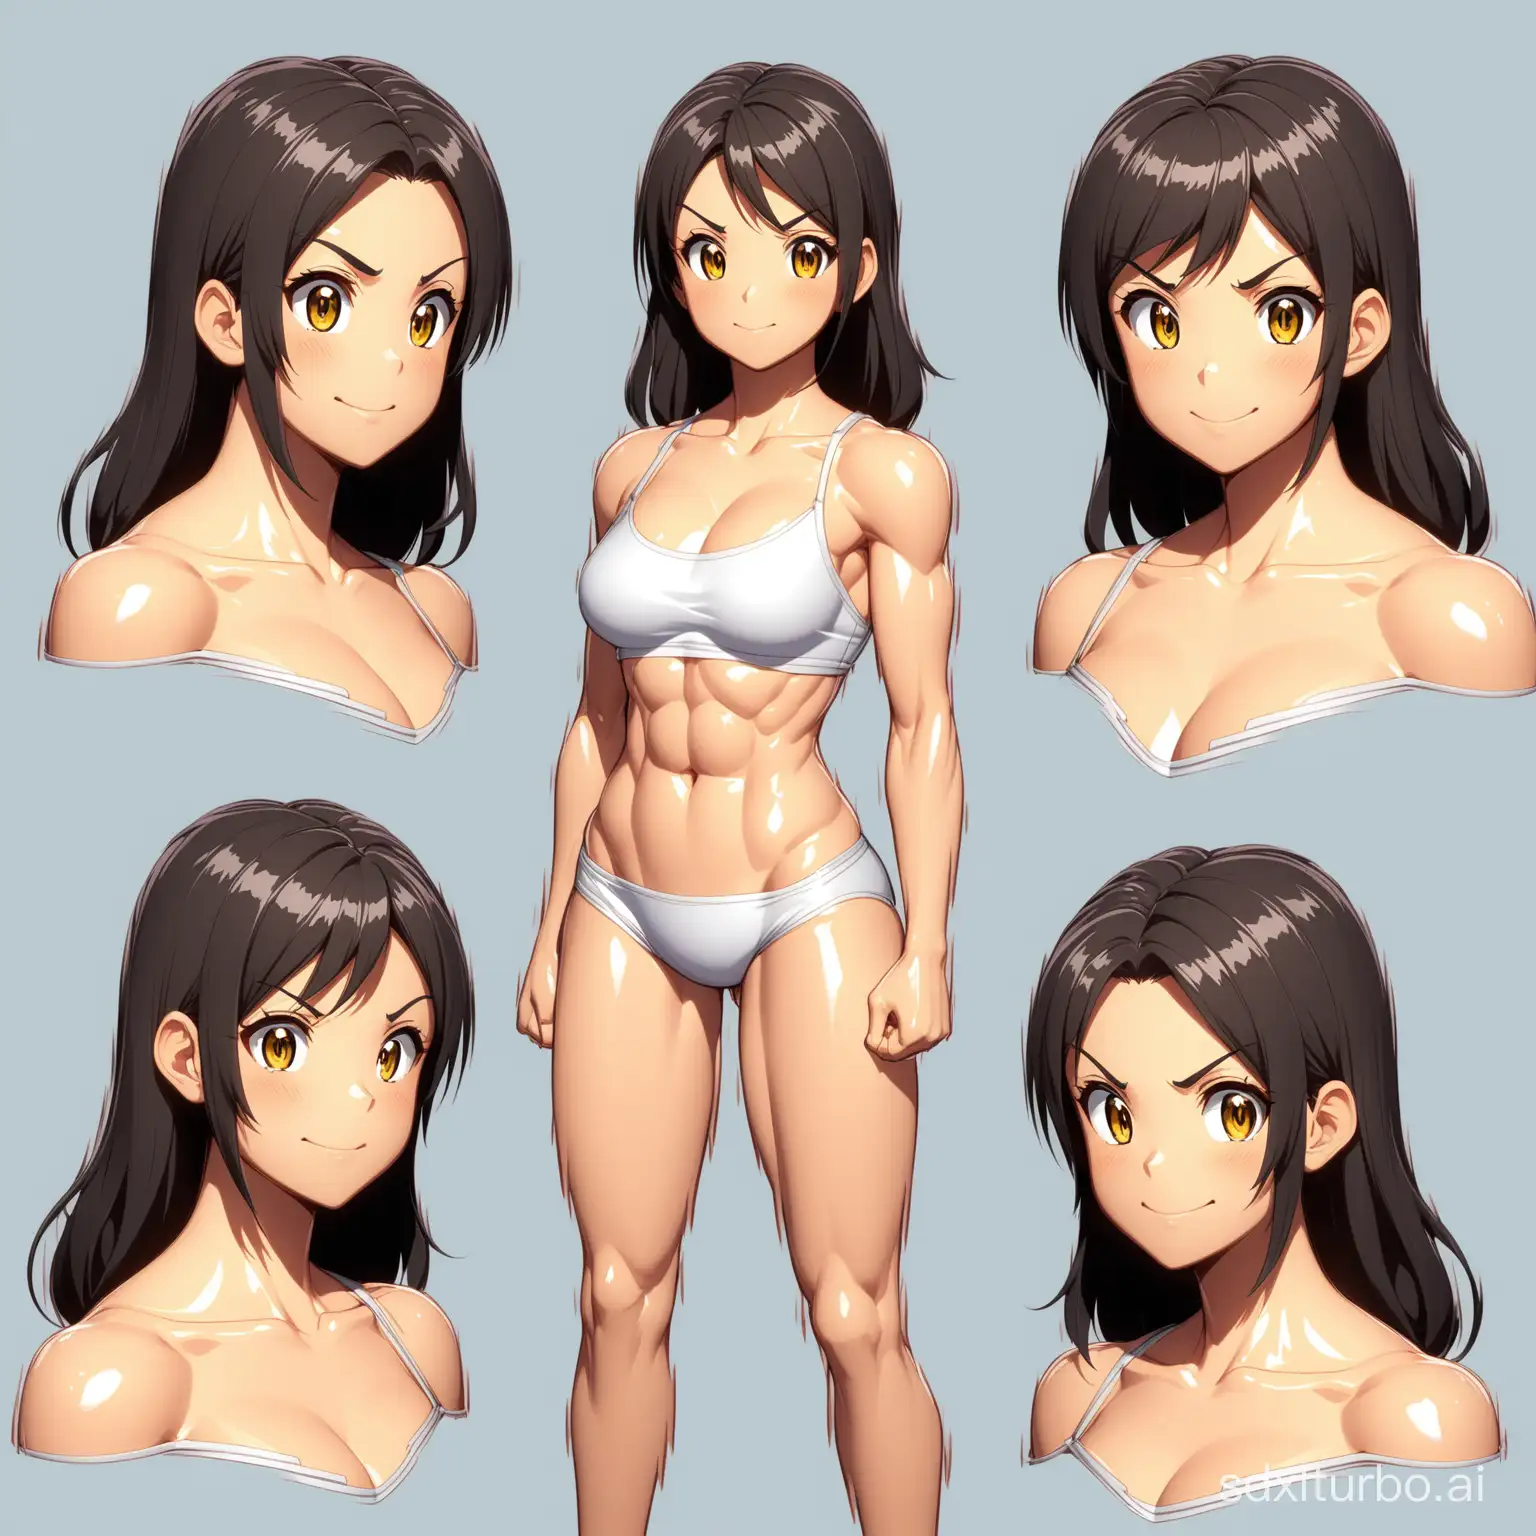 Anime-Style-Character-Sheet-for-3D-Modelling-Muscular-Adult-Girl-with-Expressive-Faces